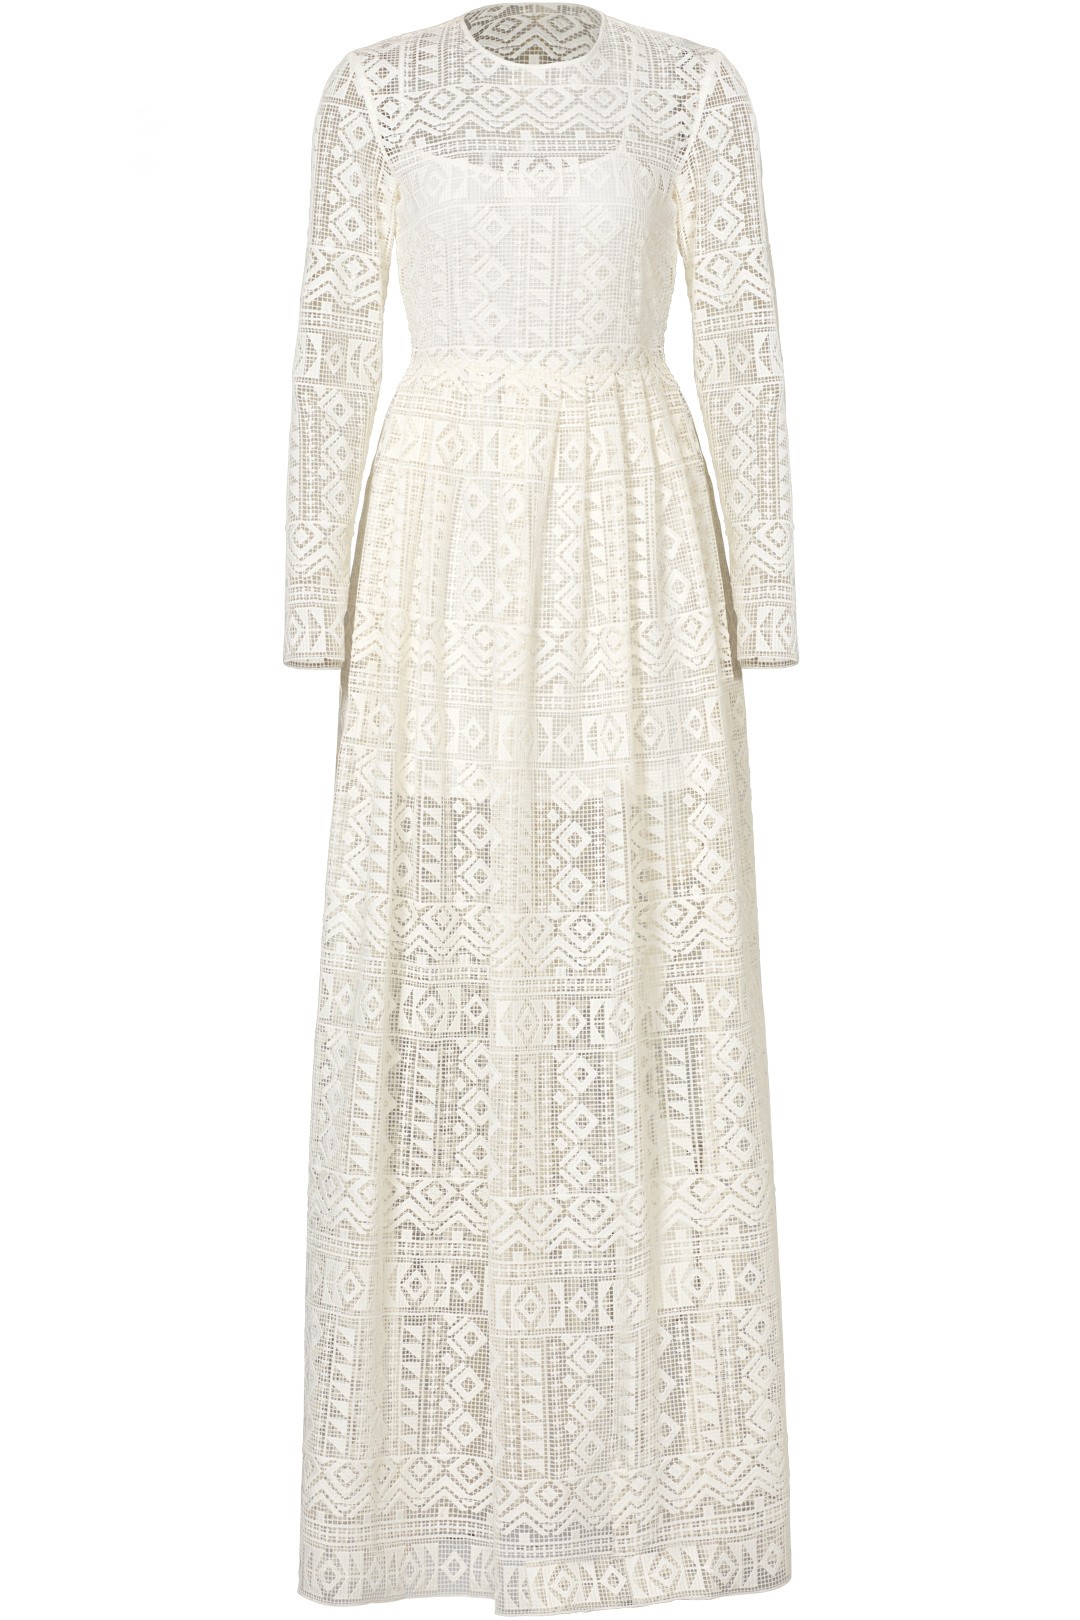 Drenched in the Summer Sun: Dreamy Lace + Floral-Filled Bridal ...